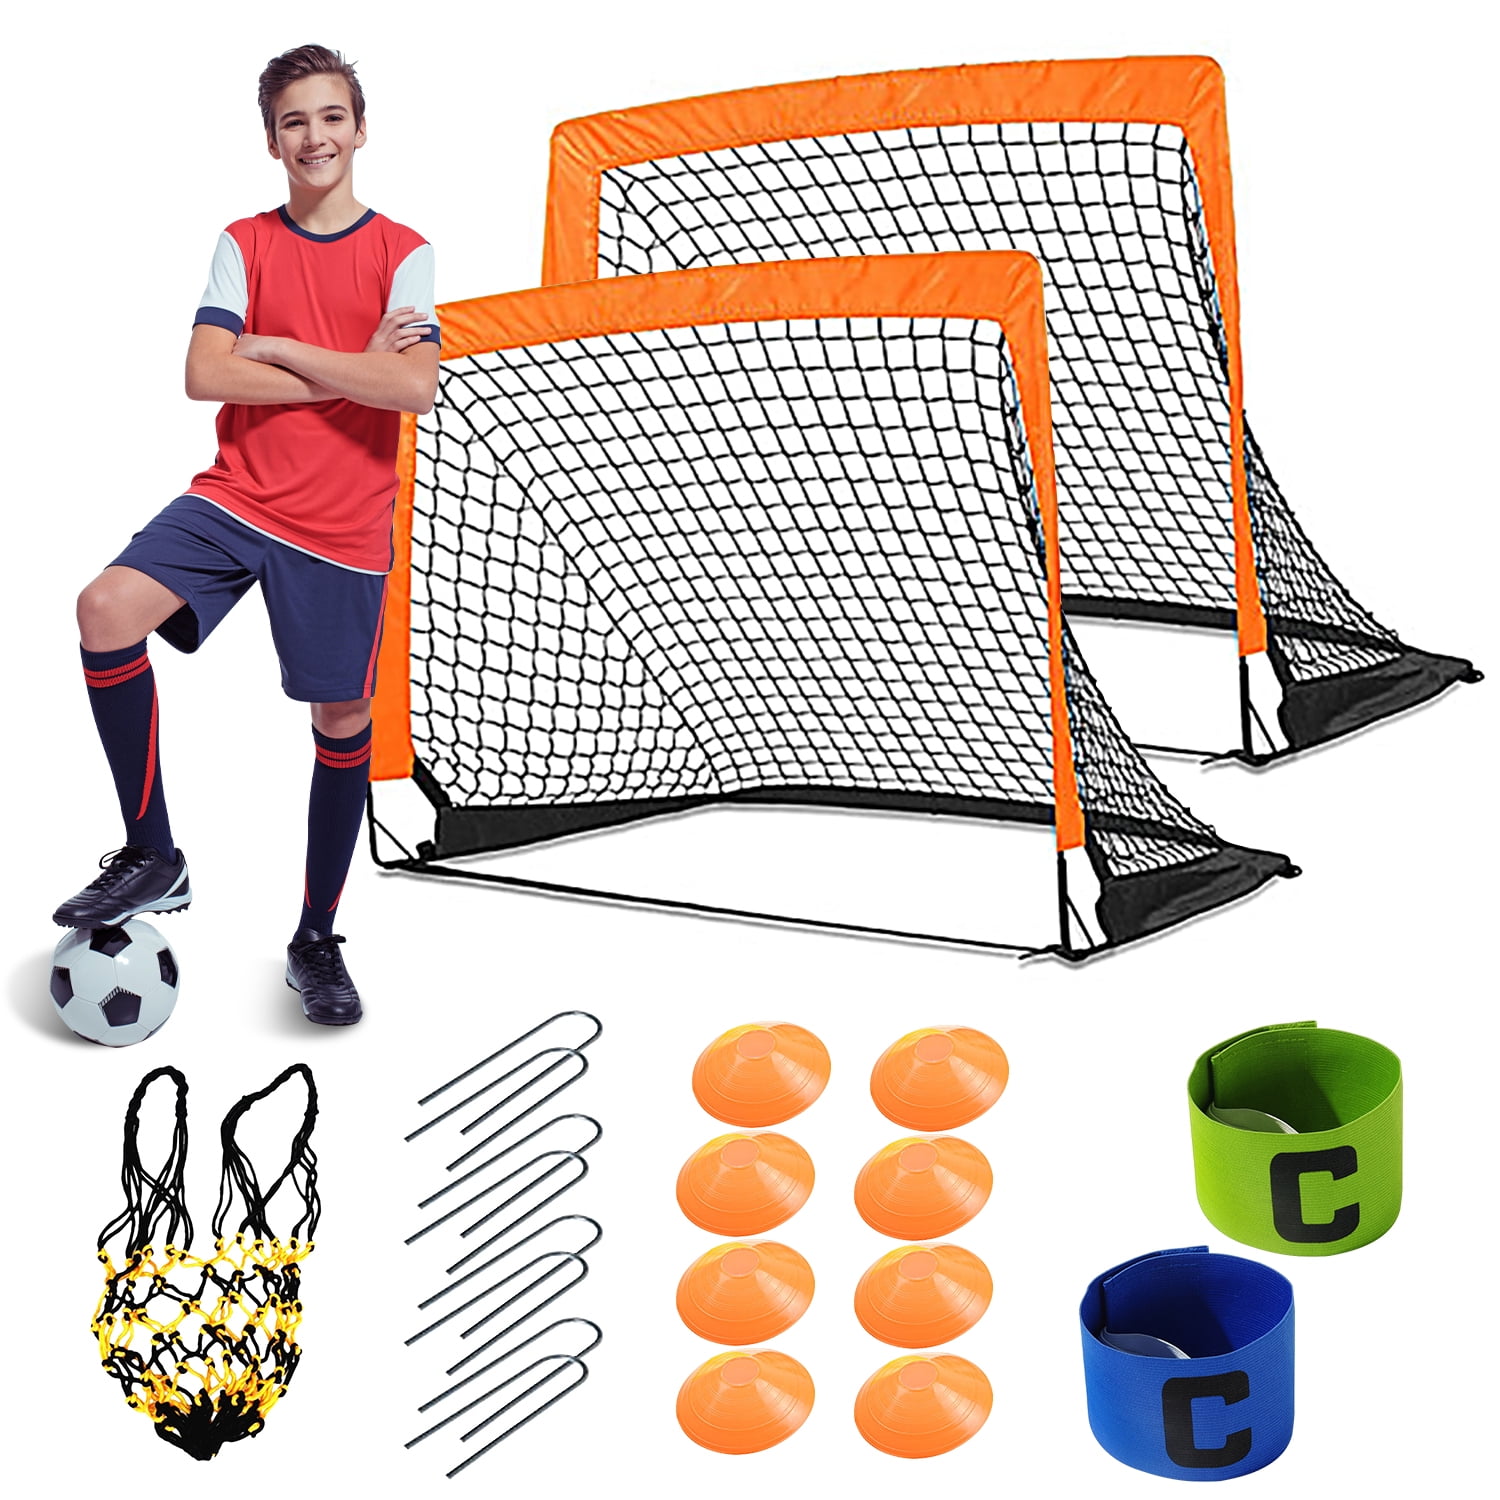 4 FT Collapsible 2 In 1 Soccer Goal Net for Training and Entertaining Portable Soccer Goal for Kids Shooting Practicing Goal with Carry Bag Pop-up Soccer Goal Net with Aim Target for Backyard 